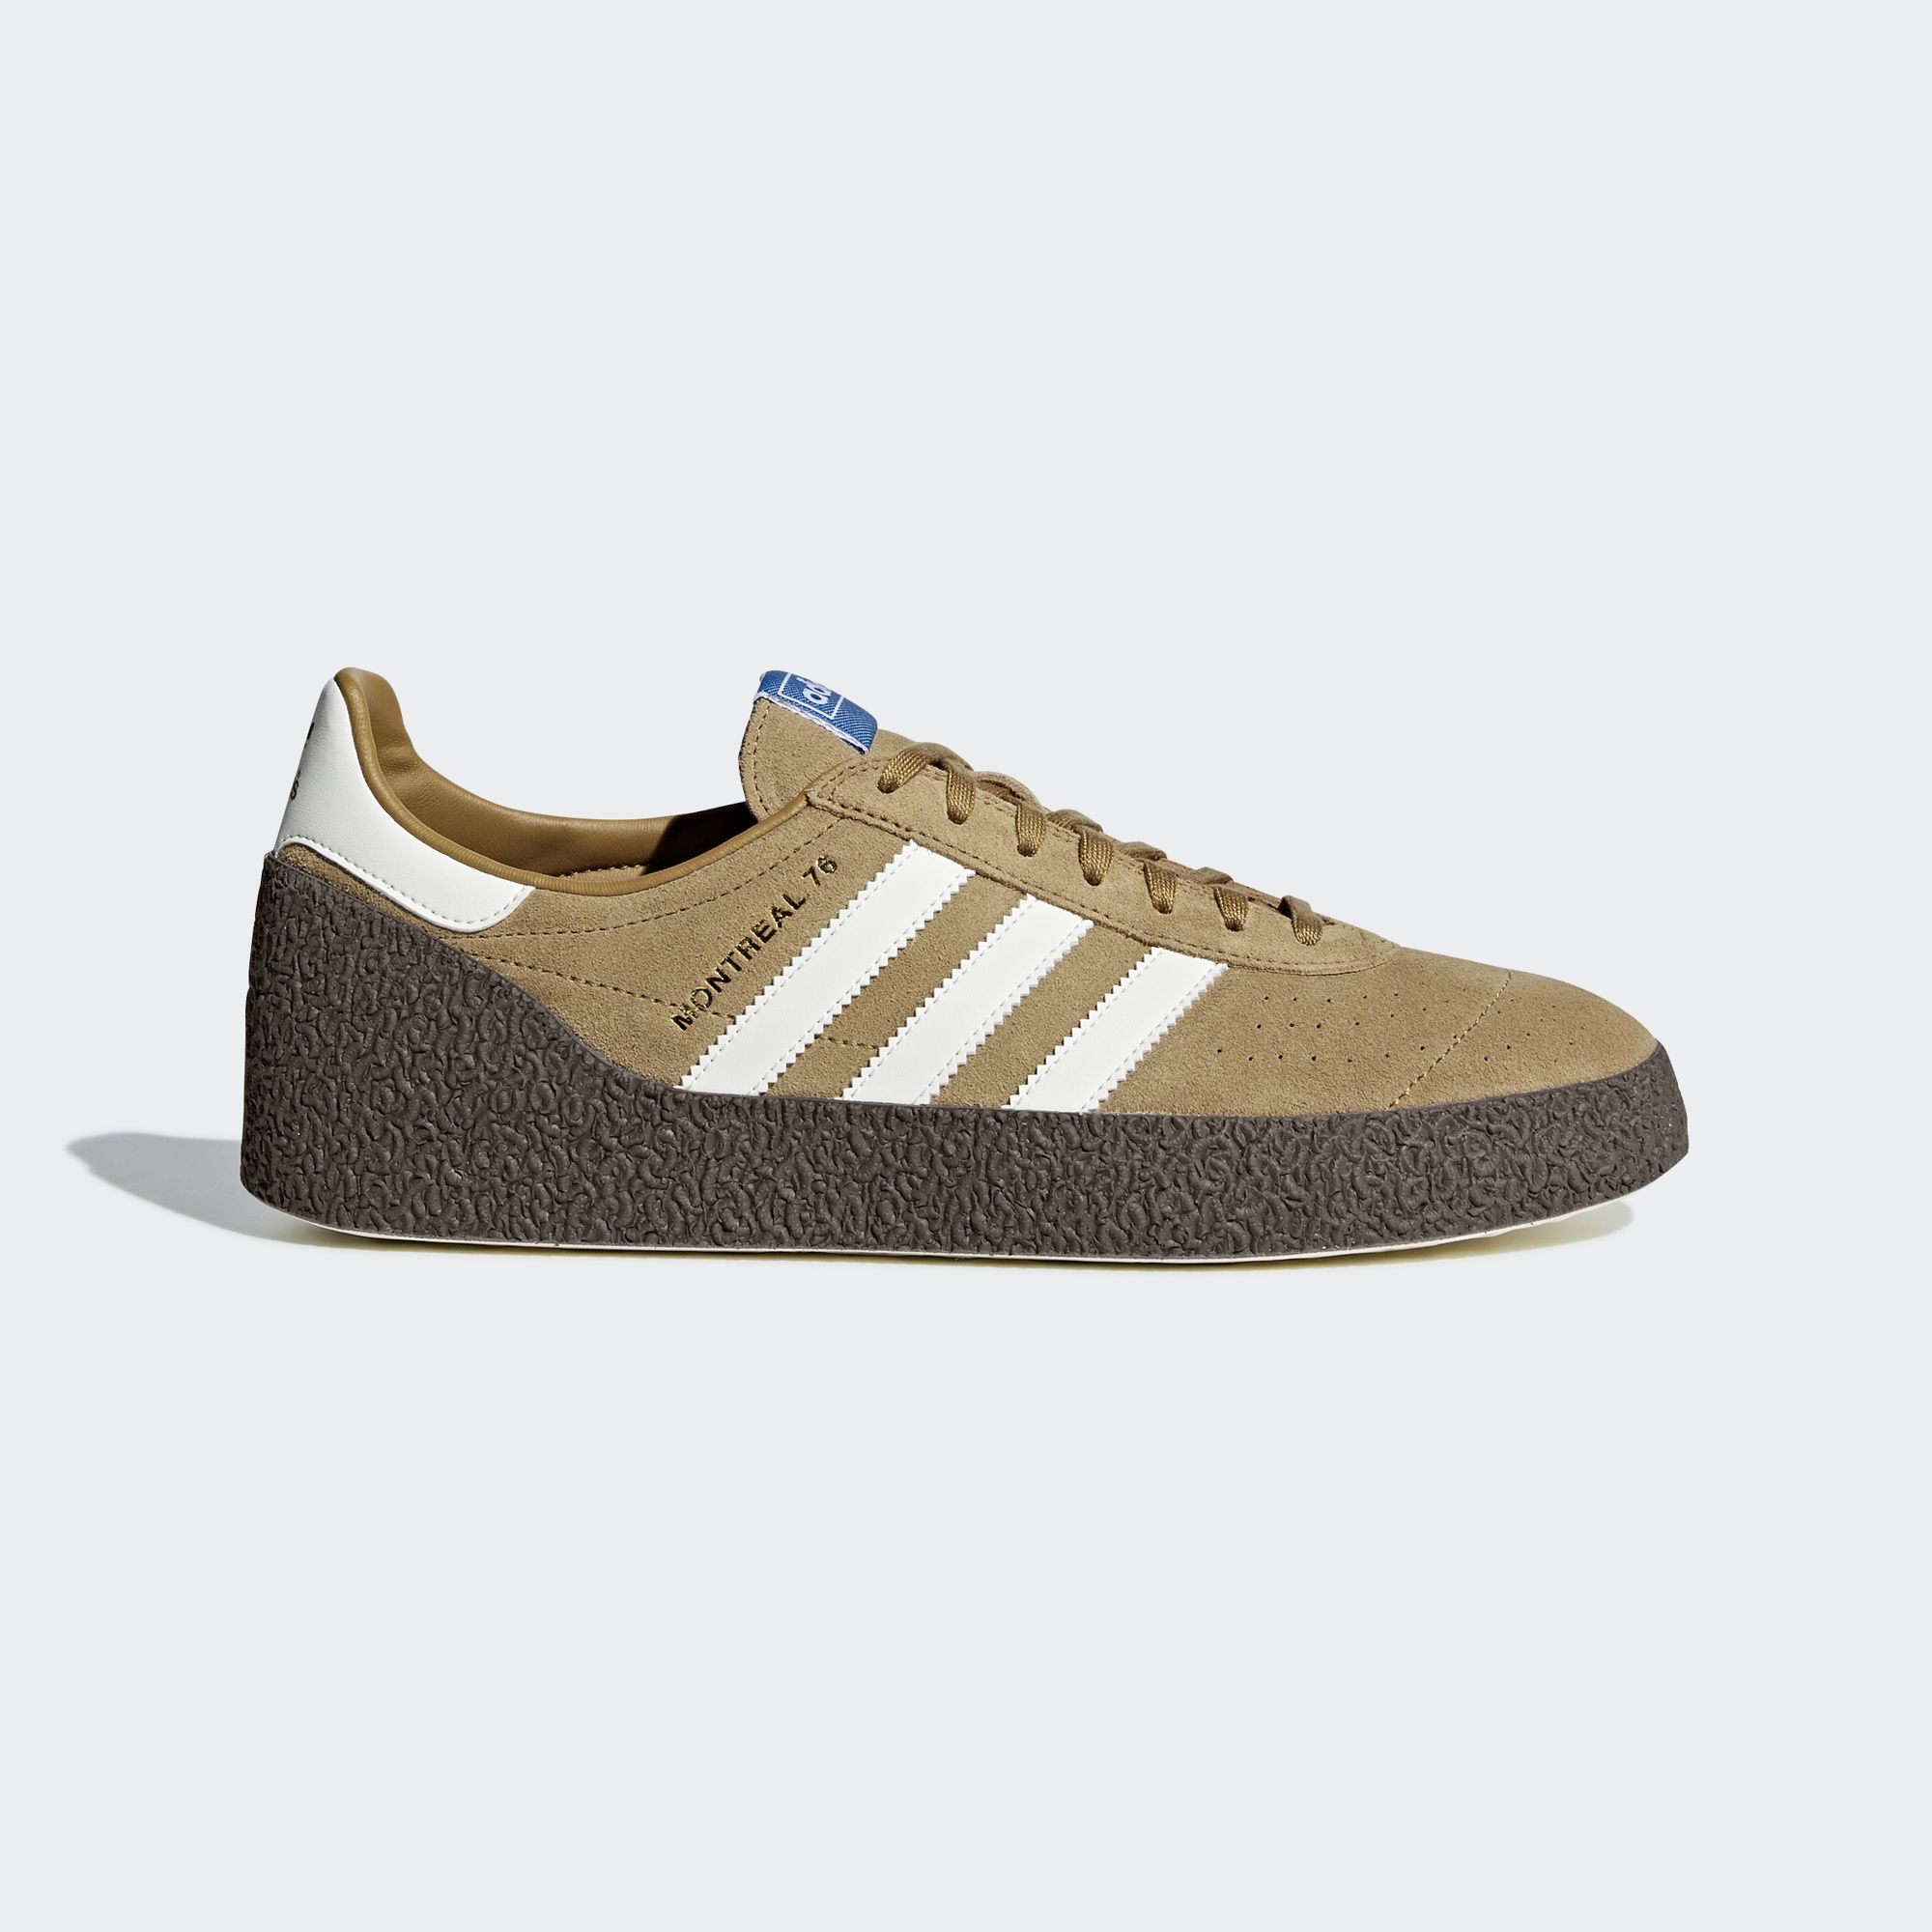 The adidas Shoe the 1976 Montreal Summer is Making a Comeback - WearTesters